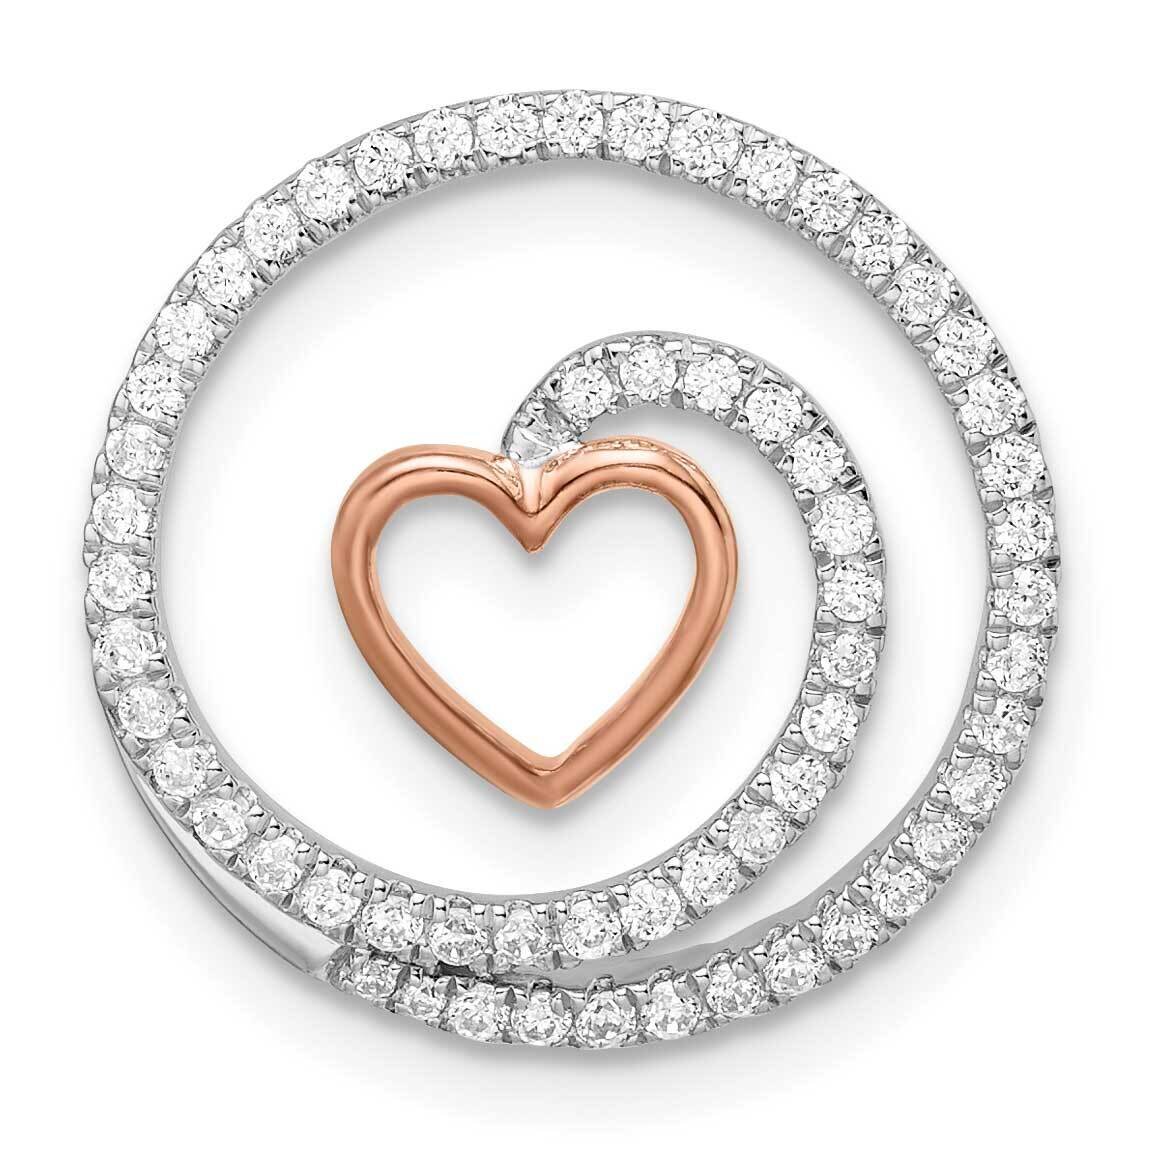 White and Rose Circle with Heart Diamond Chain Slide 14k Two-Tone Gold PM8540-030-WRA